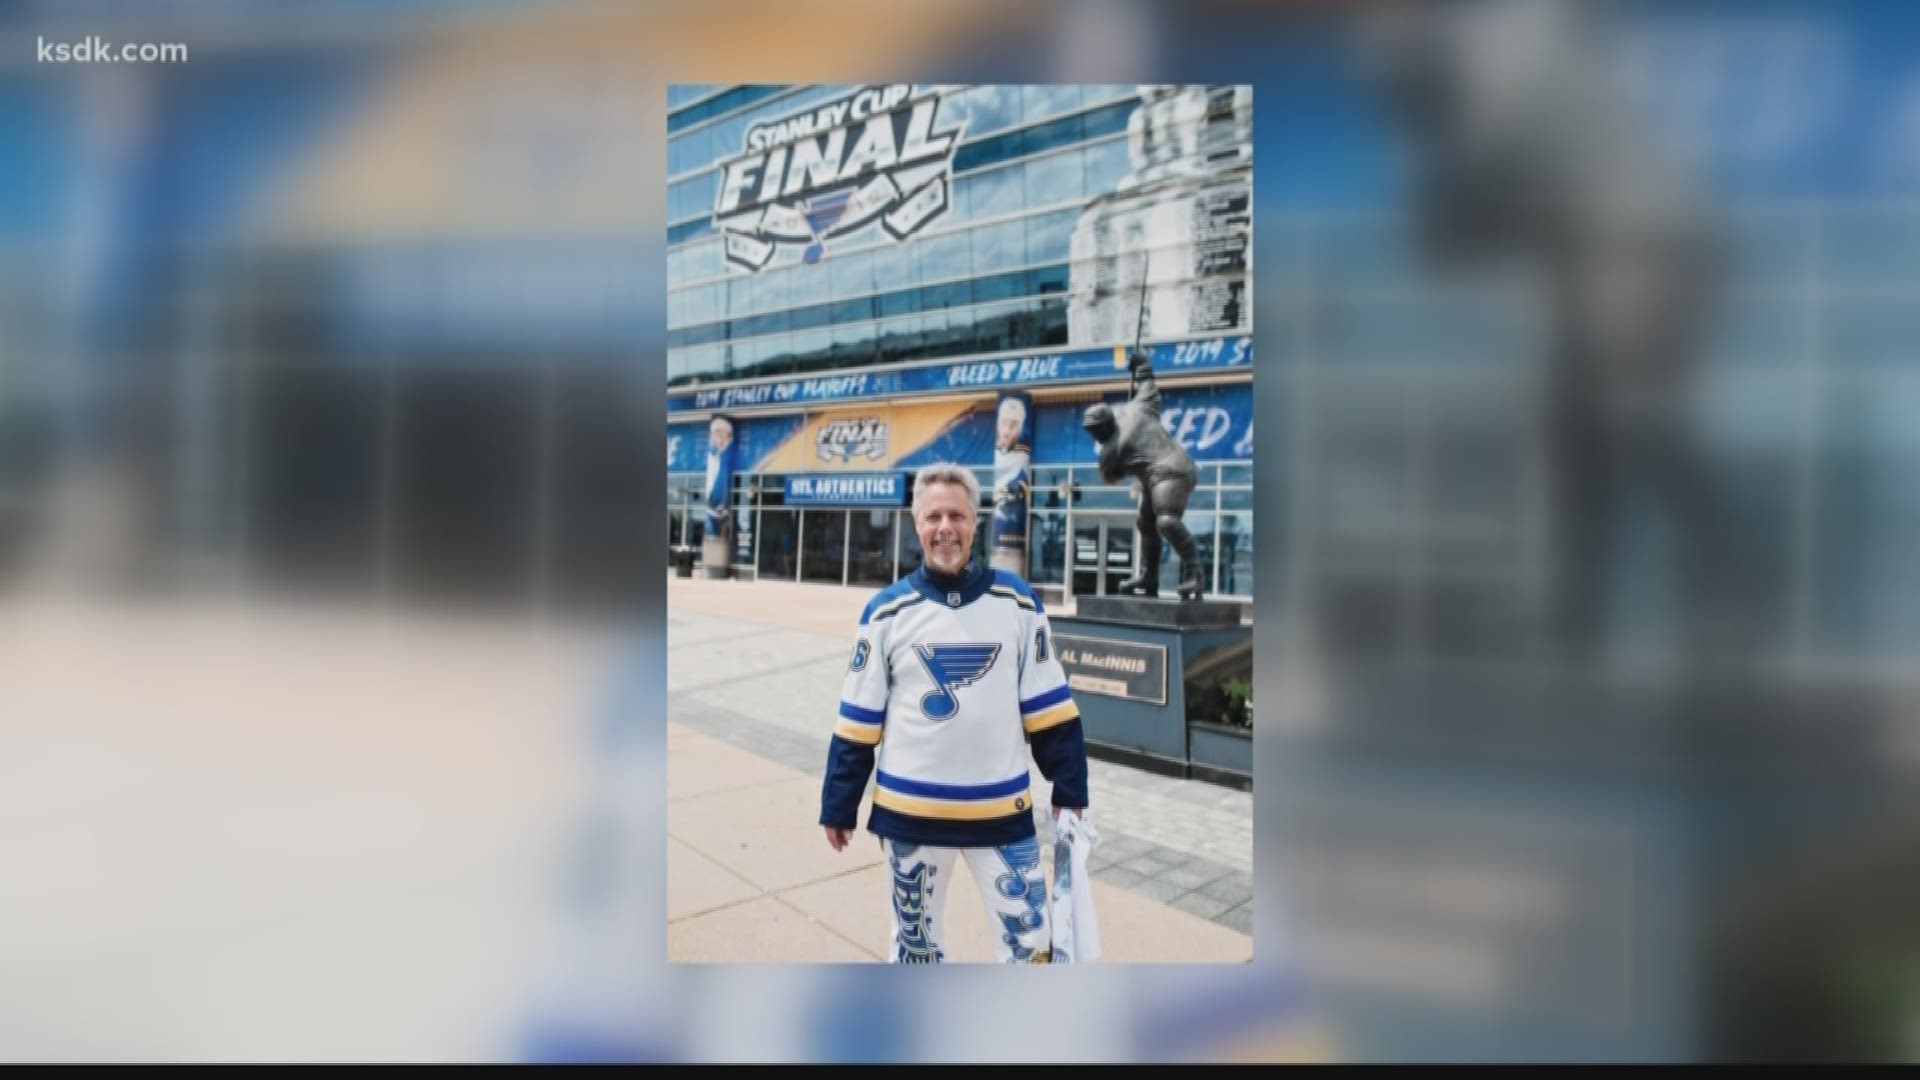 If you've been to any Blues games in recent history, you've definitely seen this guy. Rene Knott caught up with the ultimate Blues fan--the Towel Man.